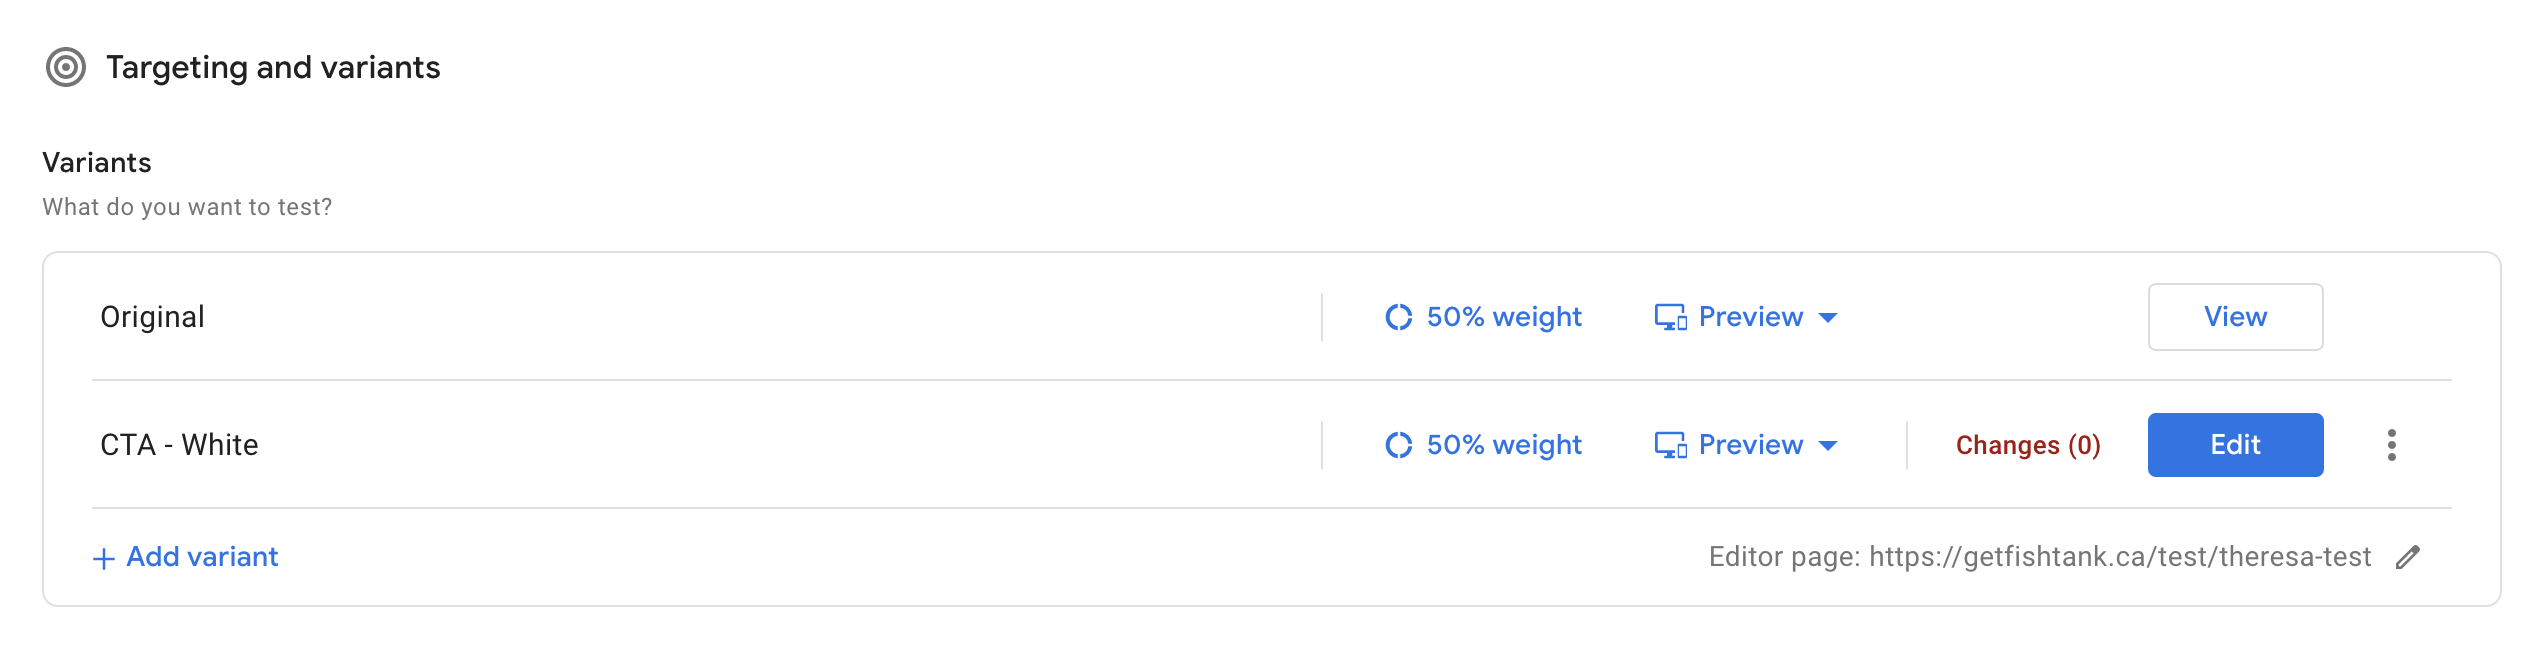 Targeting and variants in Google Optimize